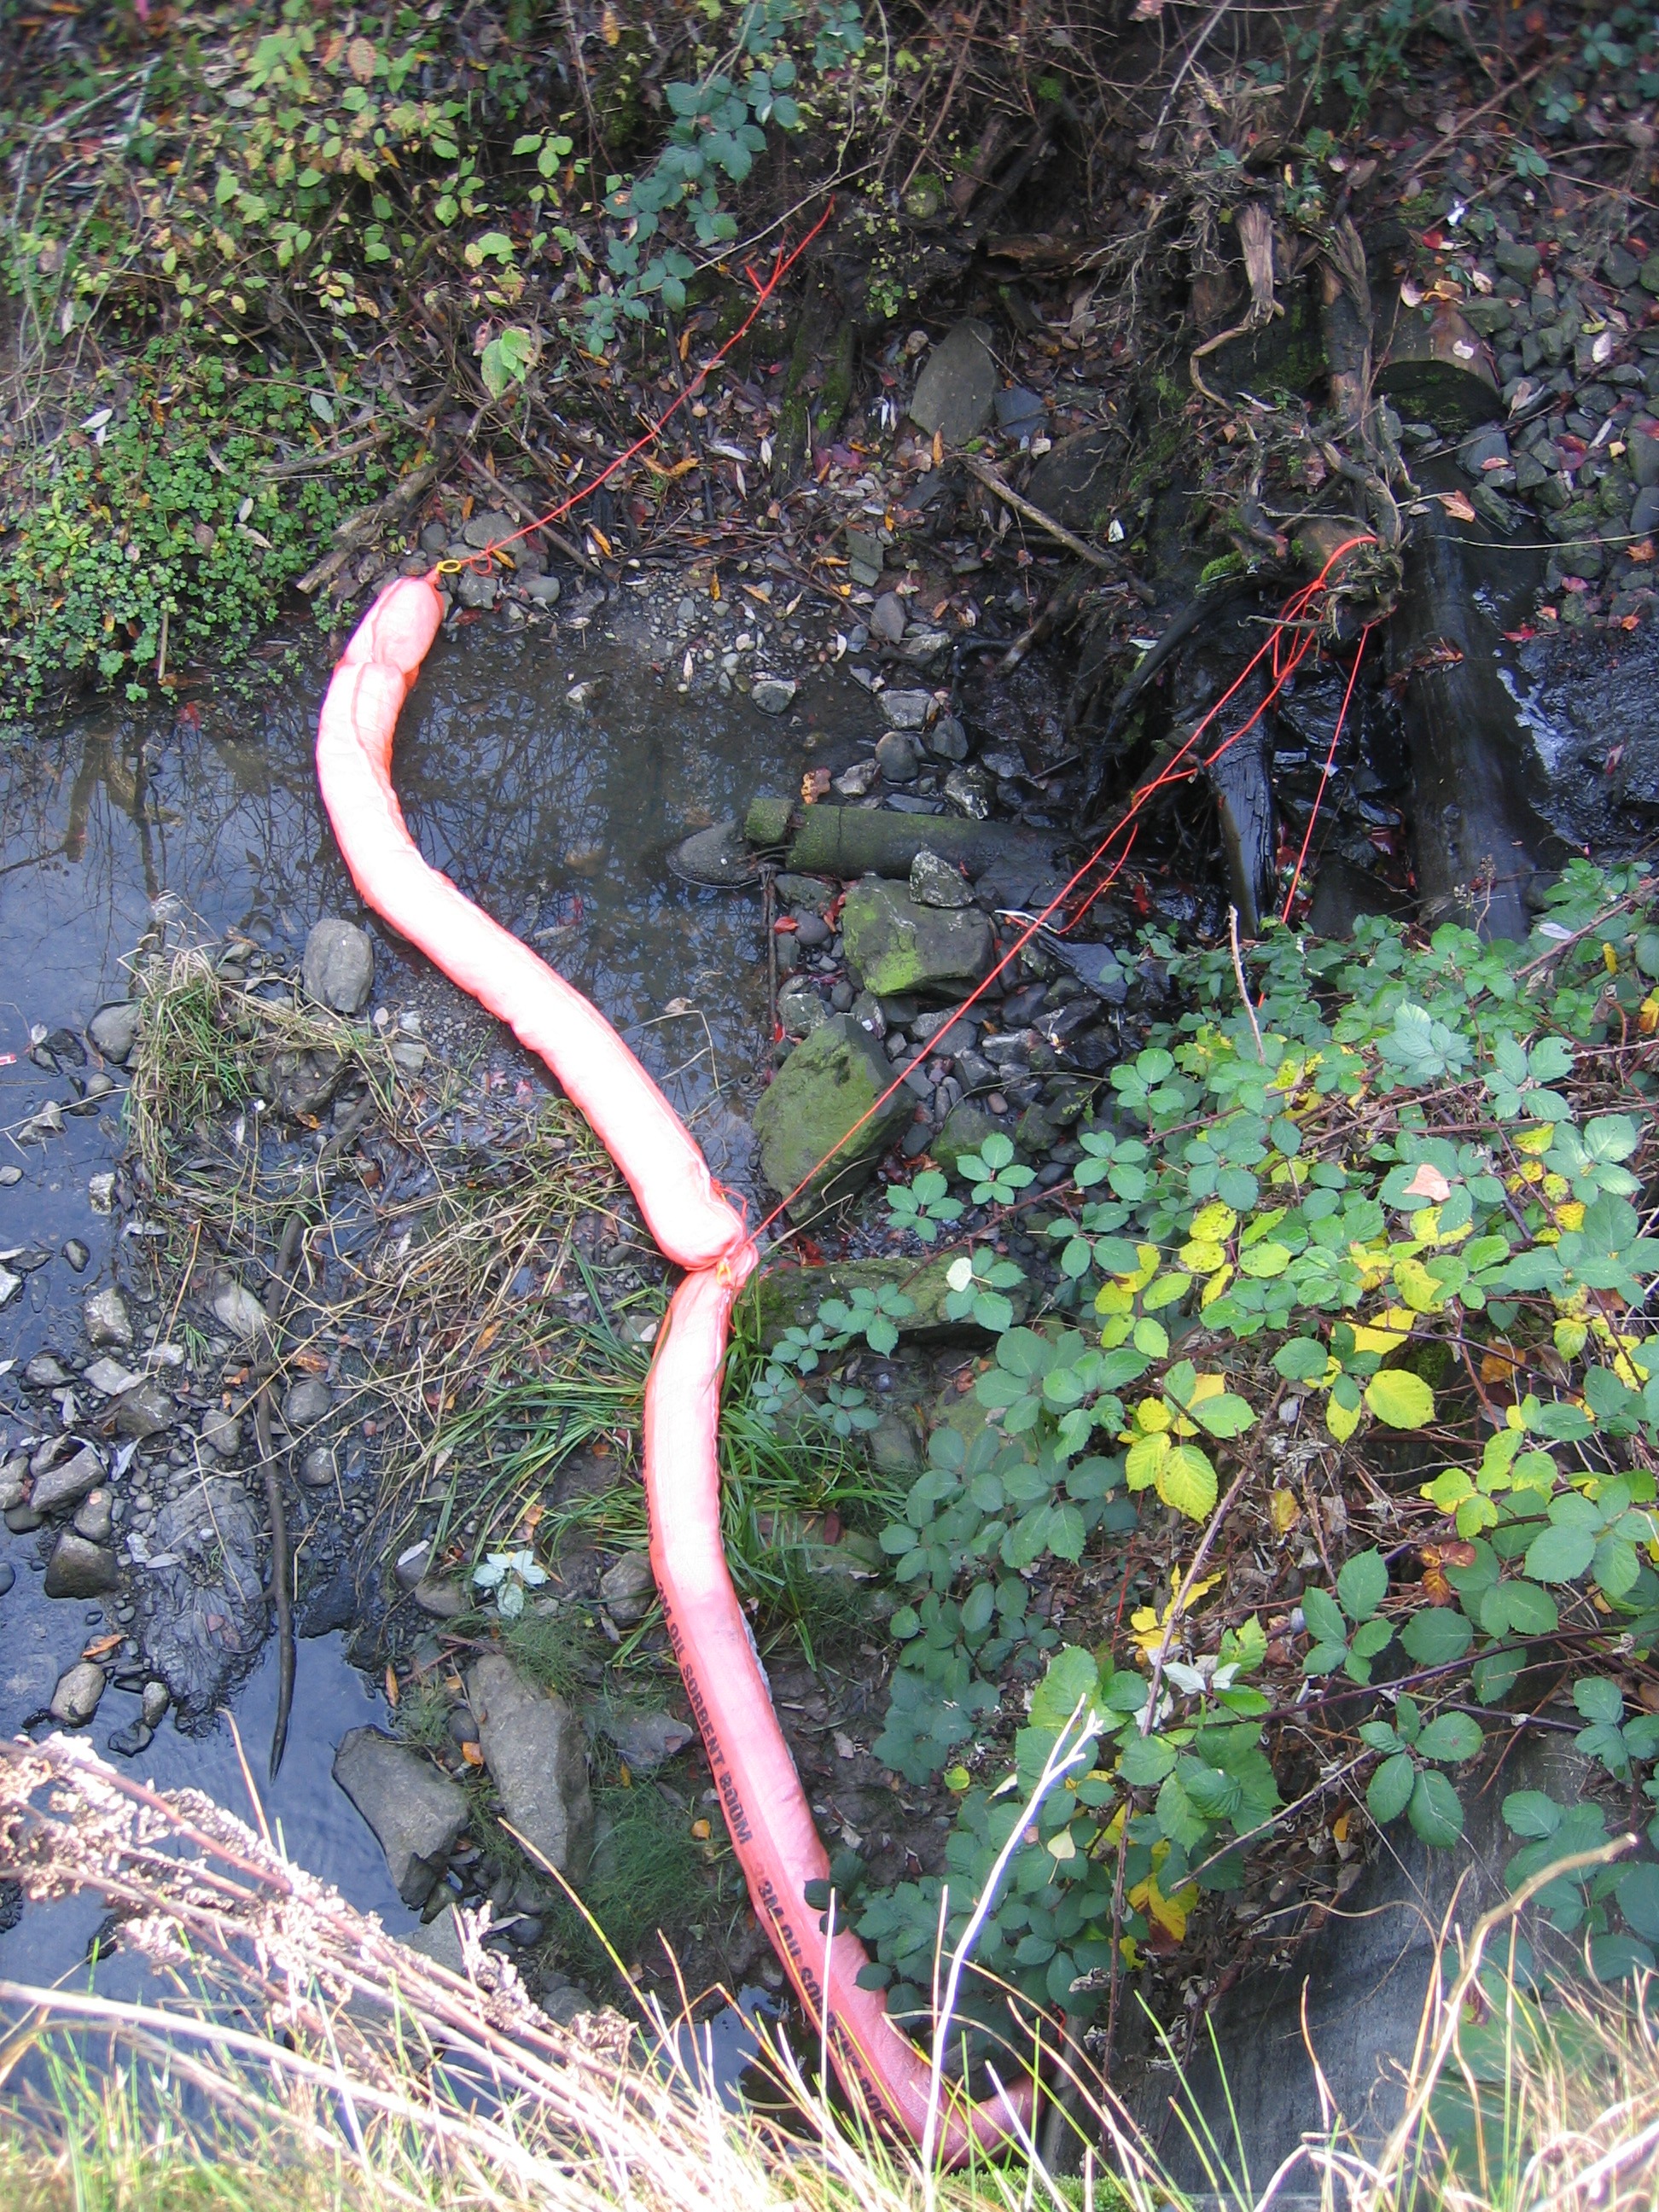 Oil absorbent boom near the outfall draining into Squalicum Creek. 